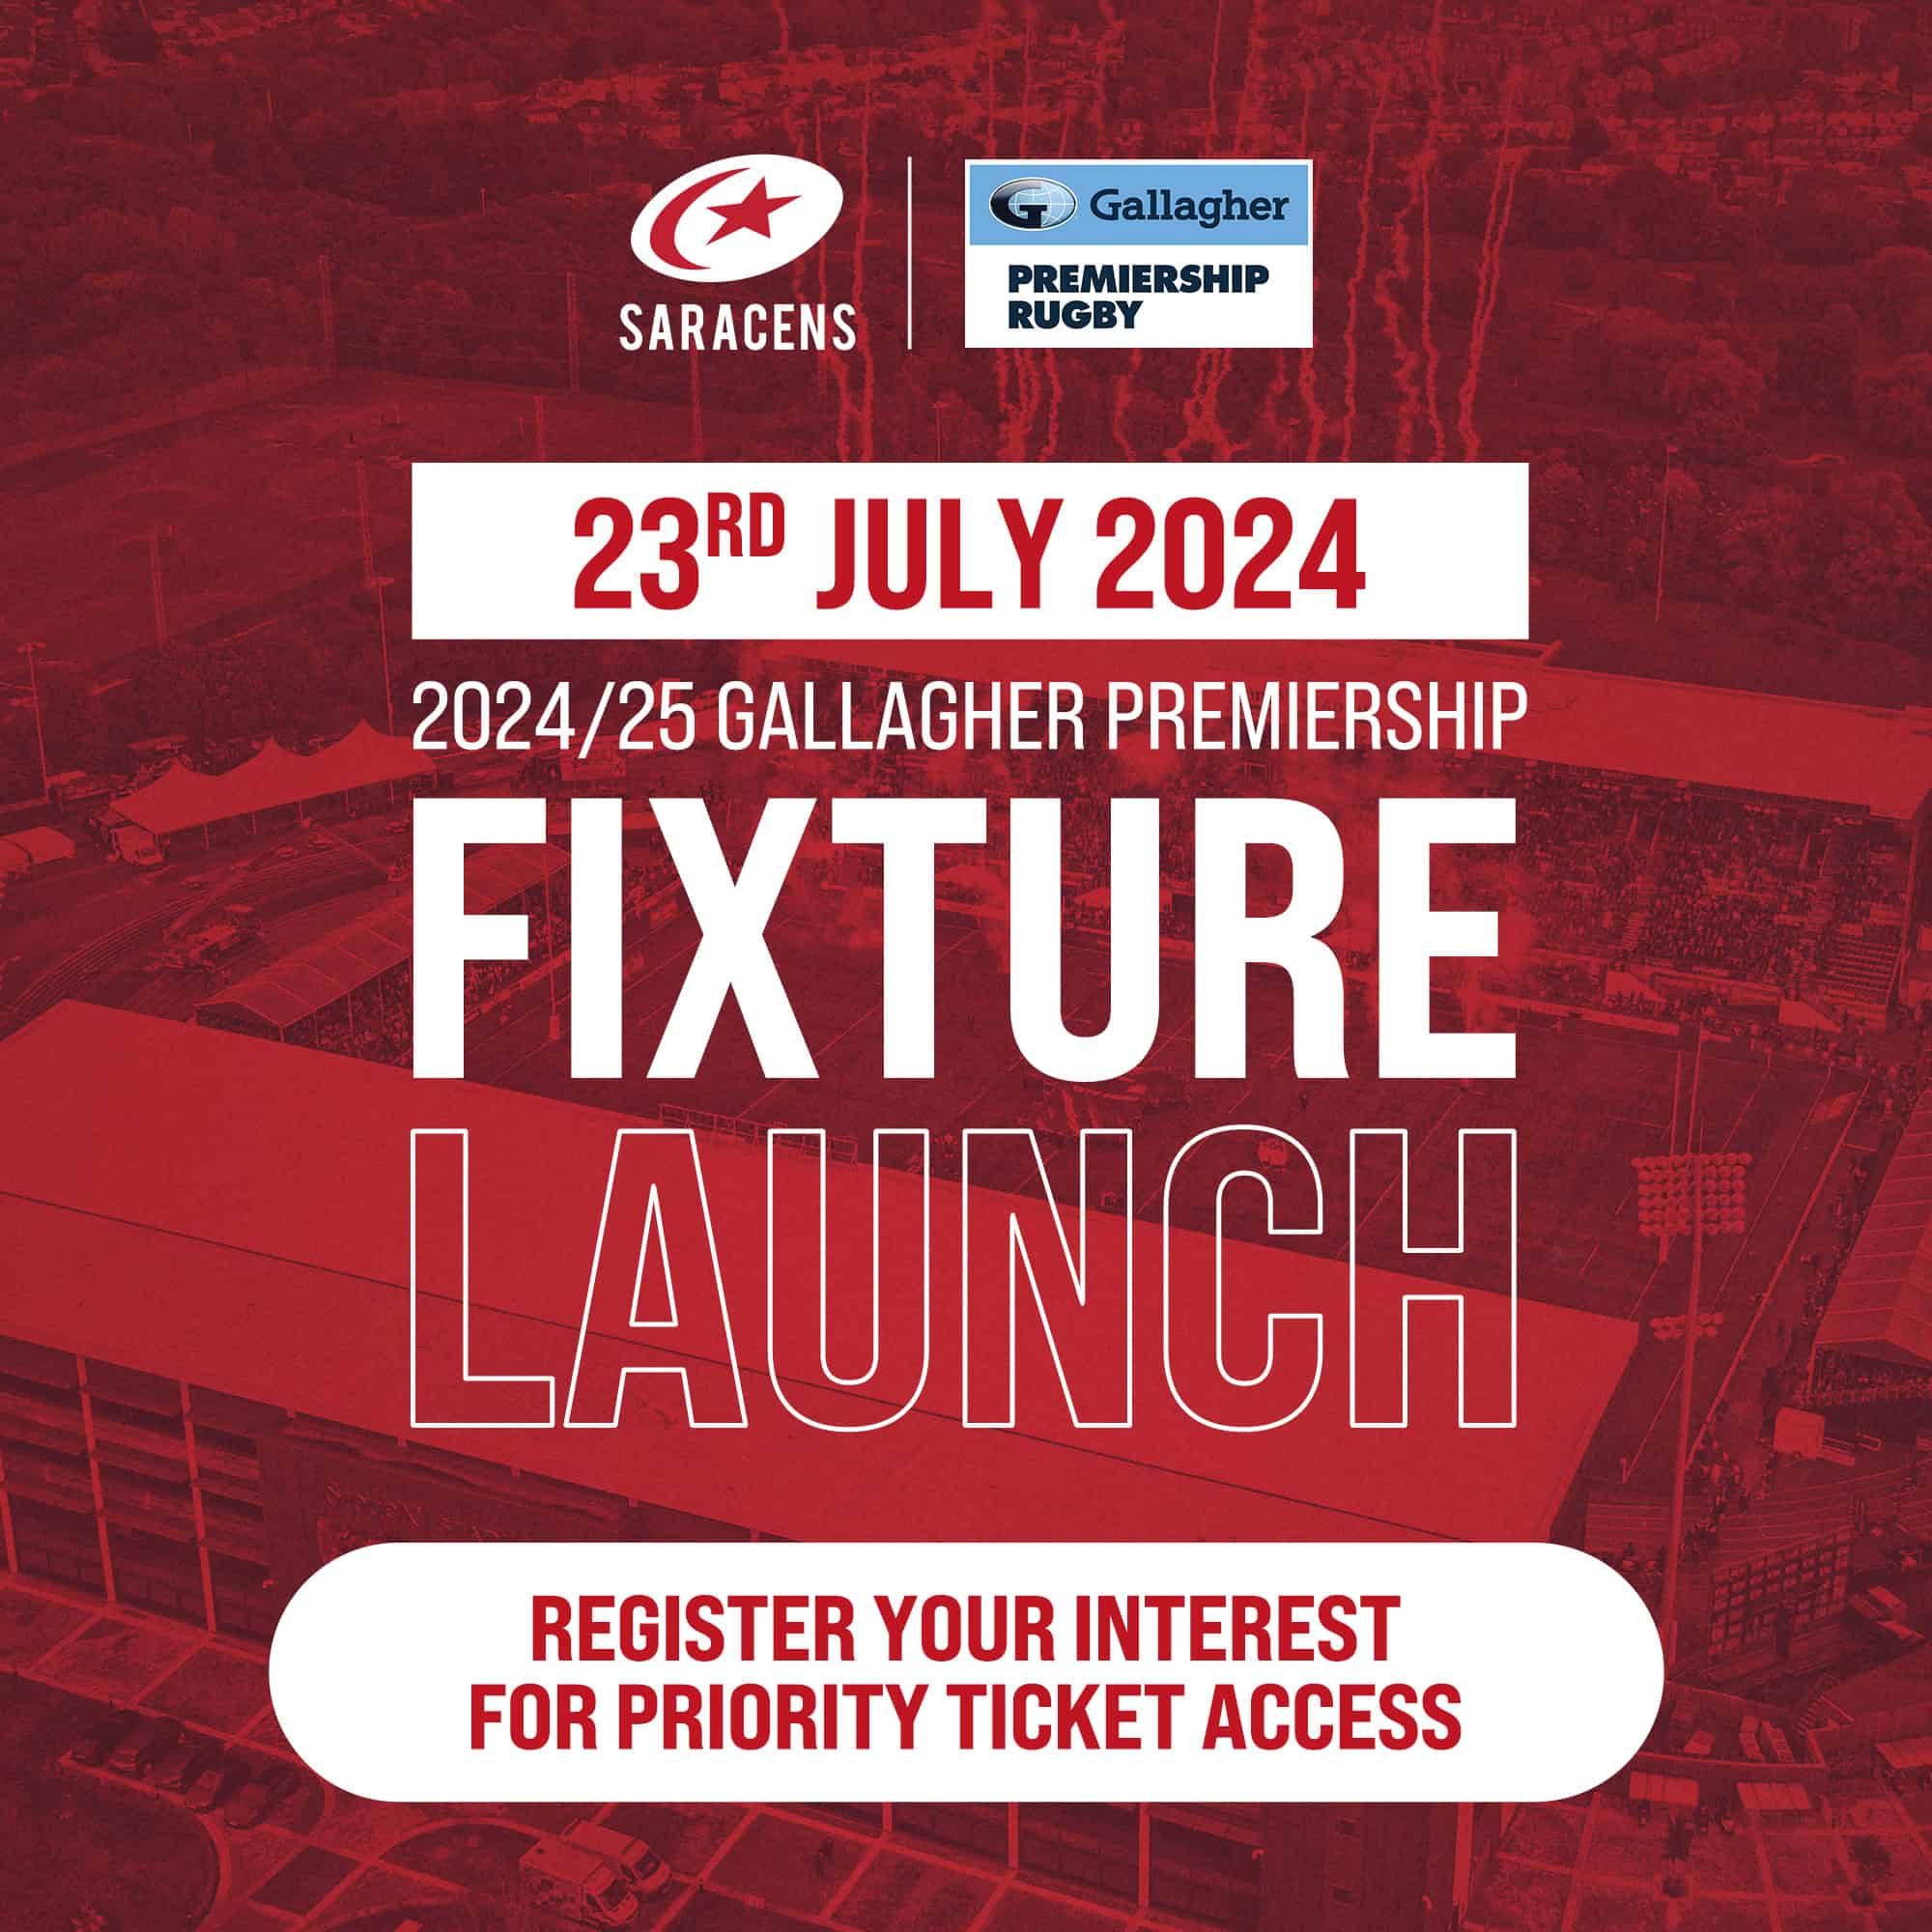 Fixture Launch Save The Date! 